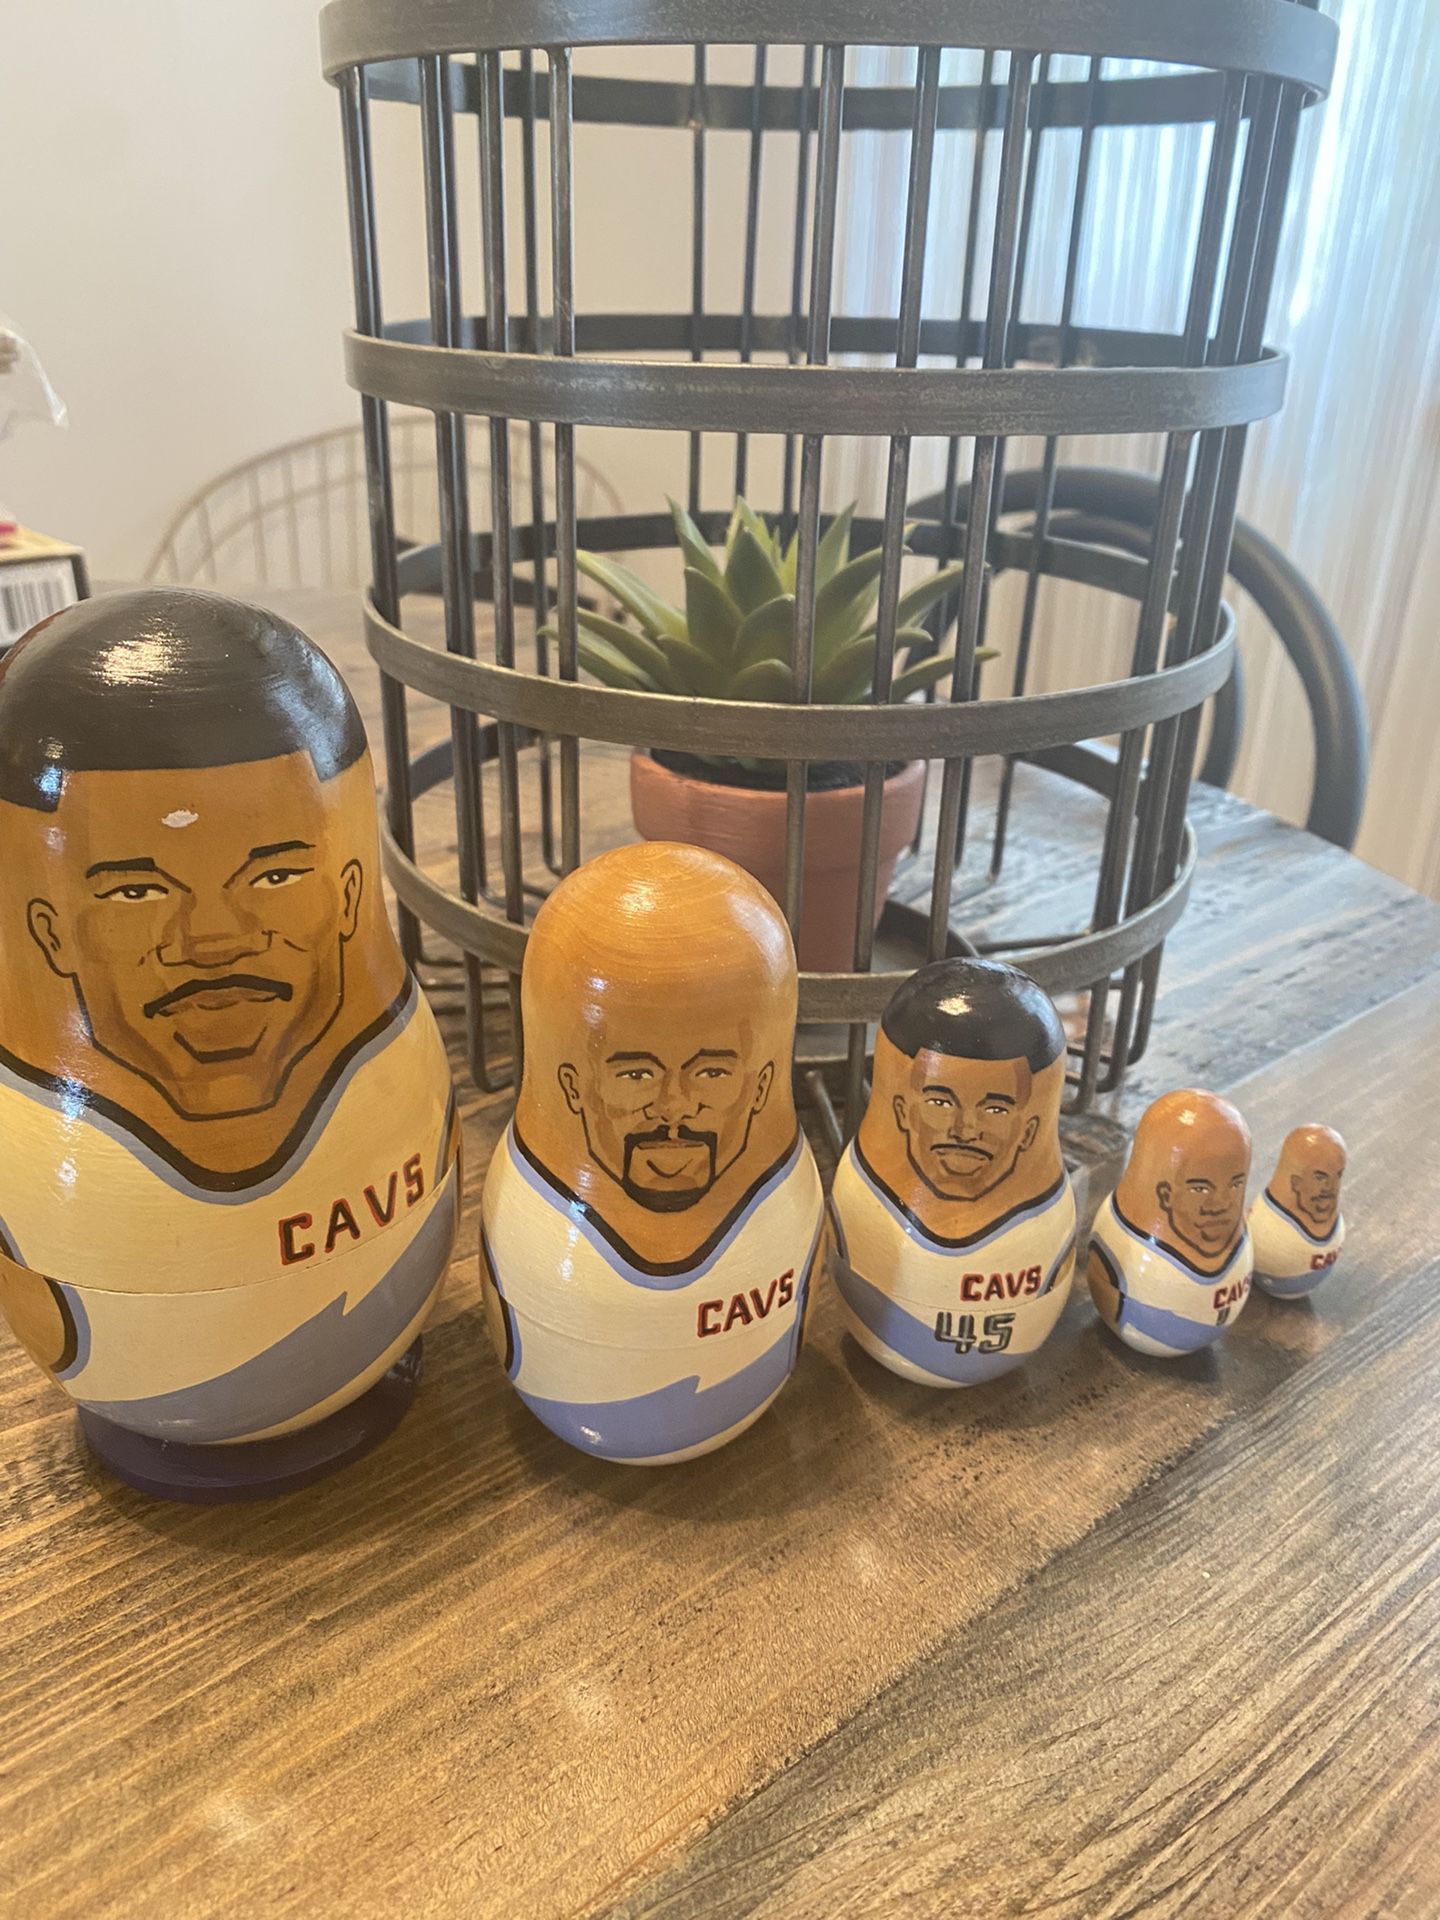 Vintage 1999 Cleveland Cavaliers wooden Russian nesting doll -Great collectible basketball set!